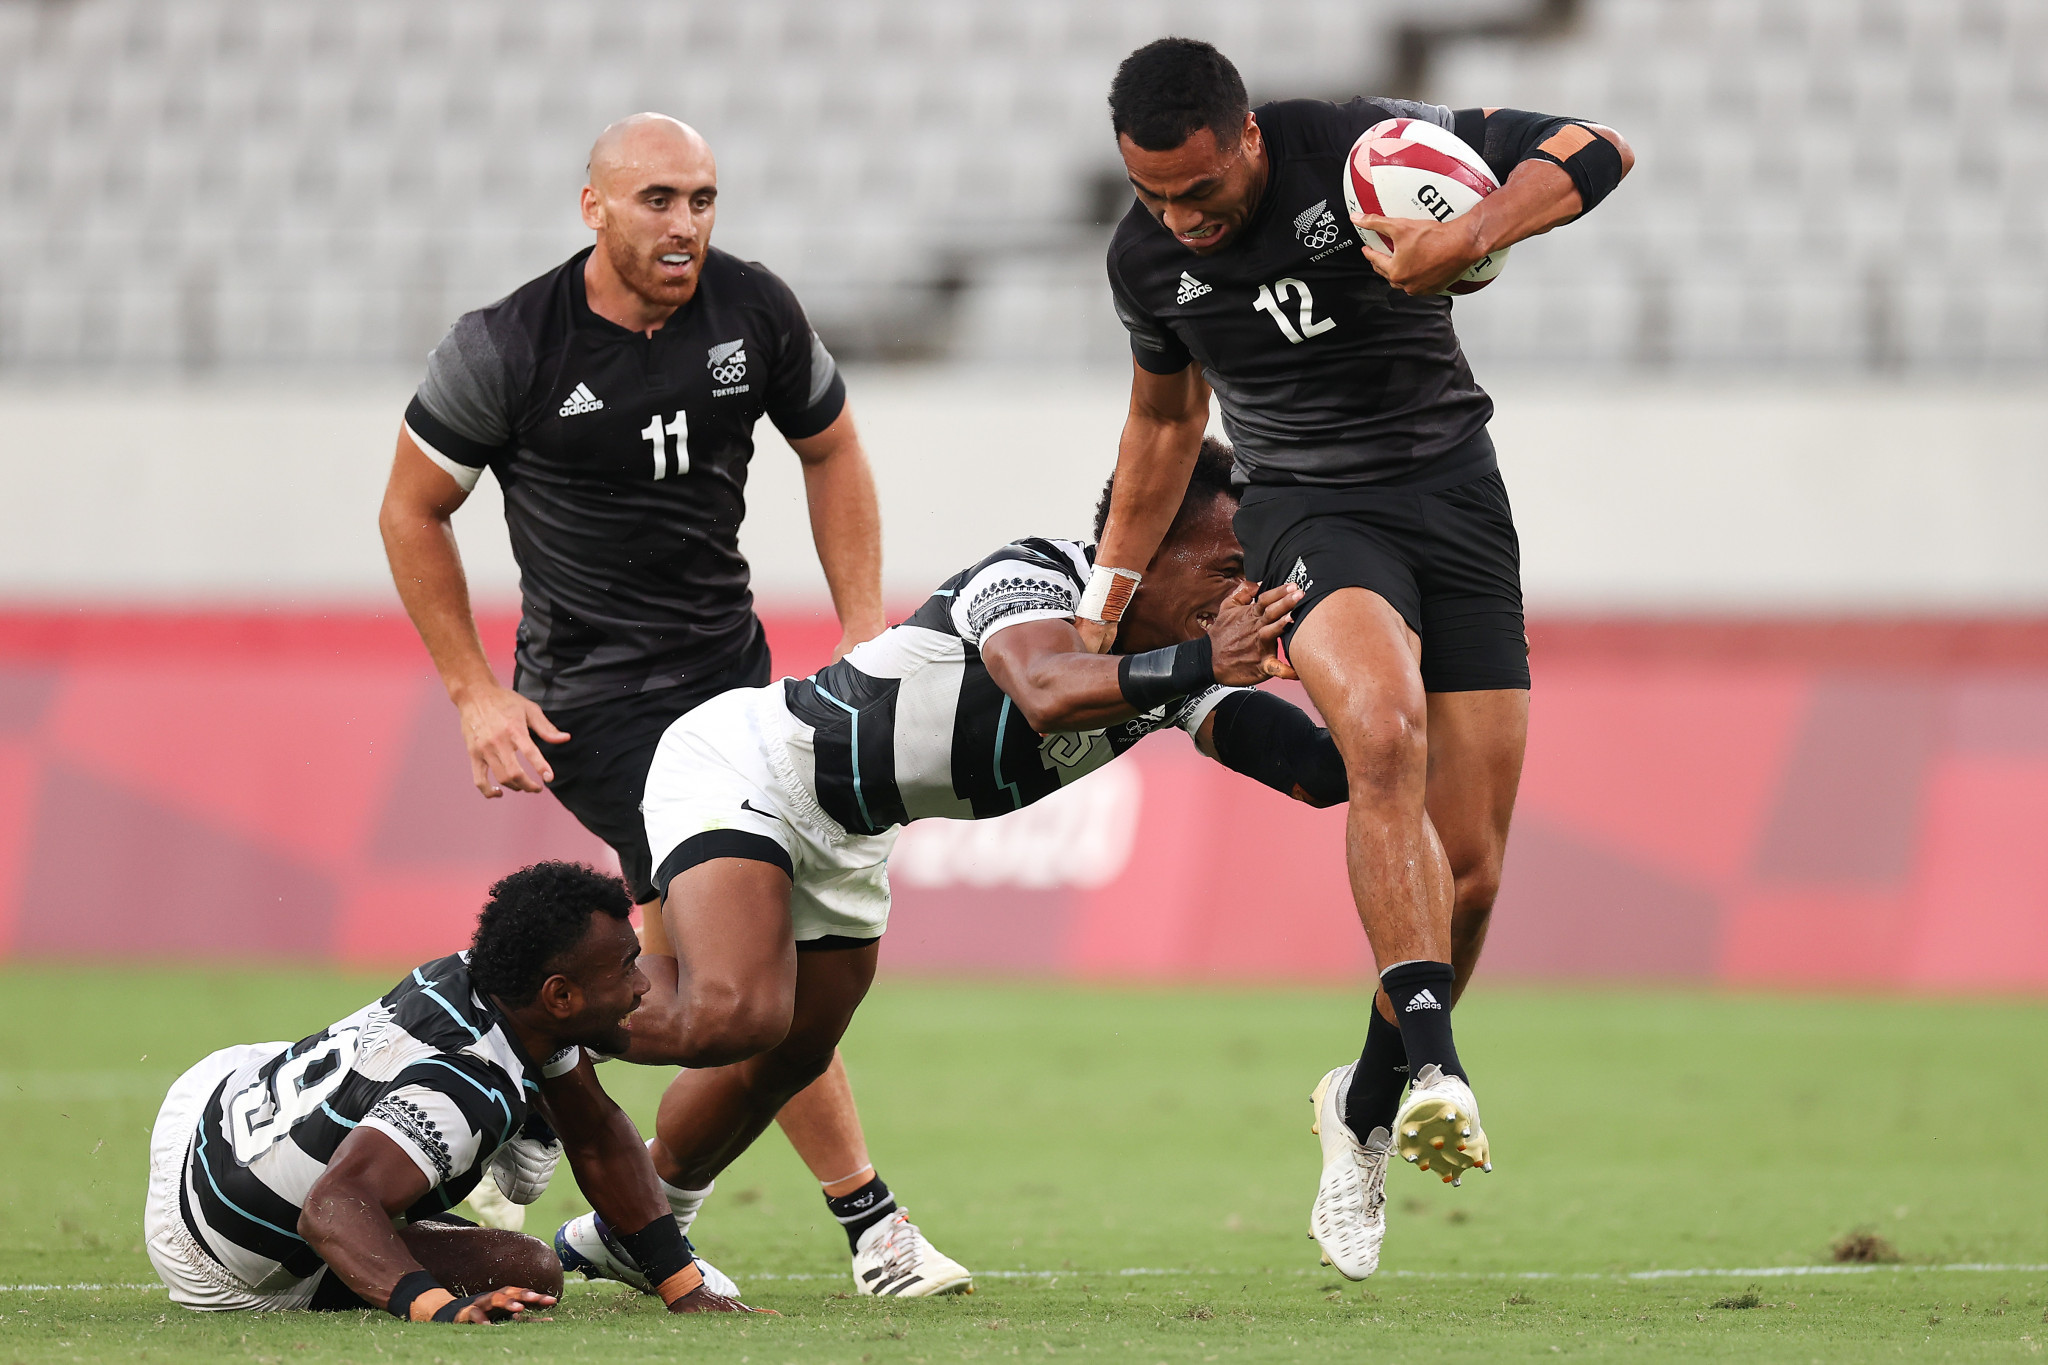 New Zealand's men's rugby sevens team have won five of the past six editions of the Commonwealth Games ©Getty Images